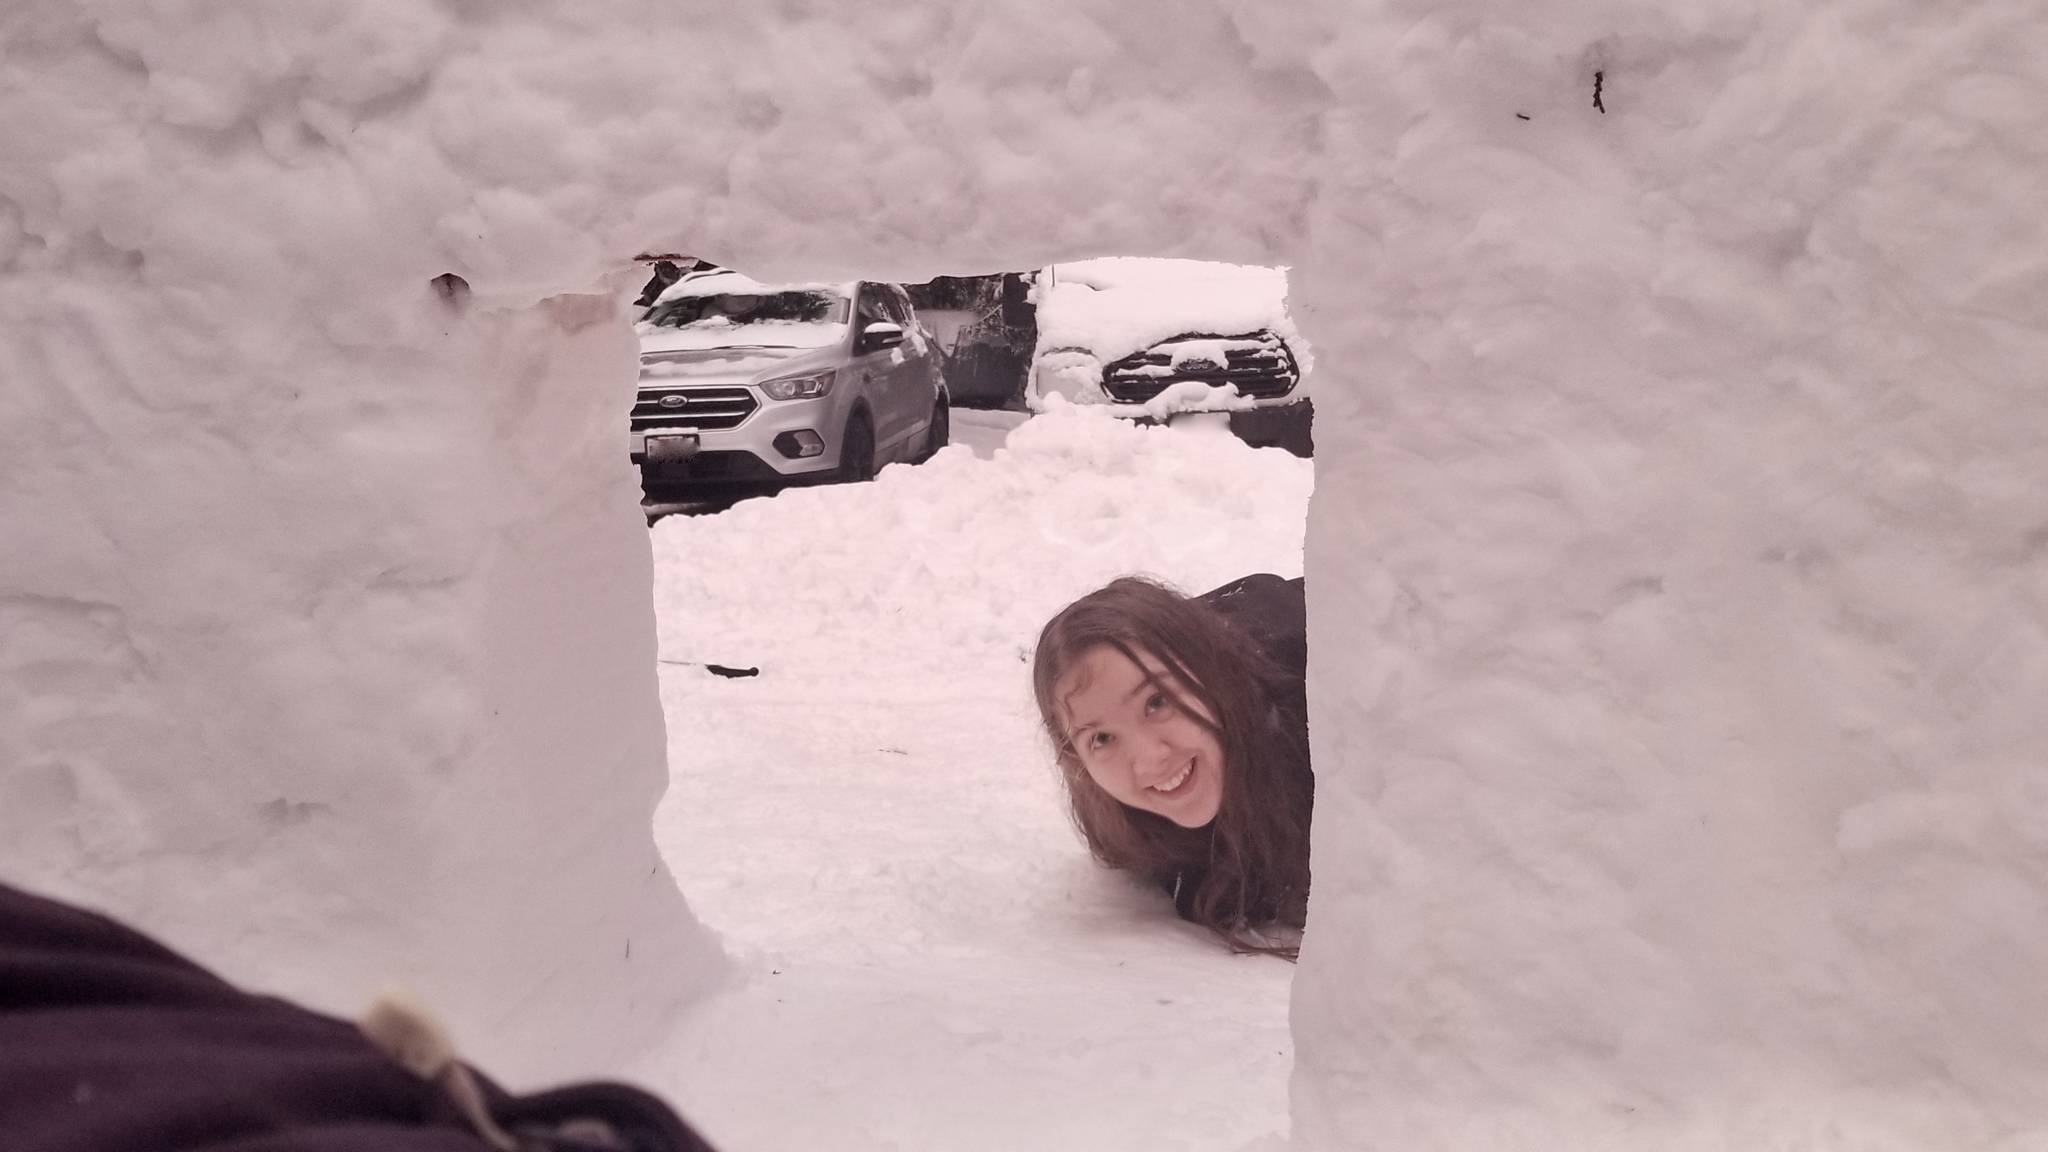 Natalie Peterson, 15, smiles for the camera as she prepares to climb into the igloo (photo by Stella Peterson)